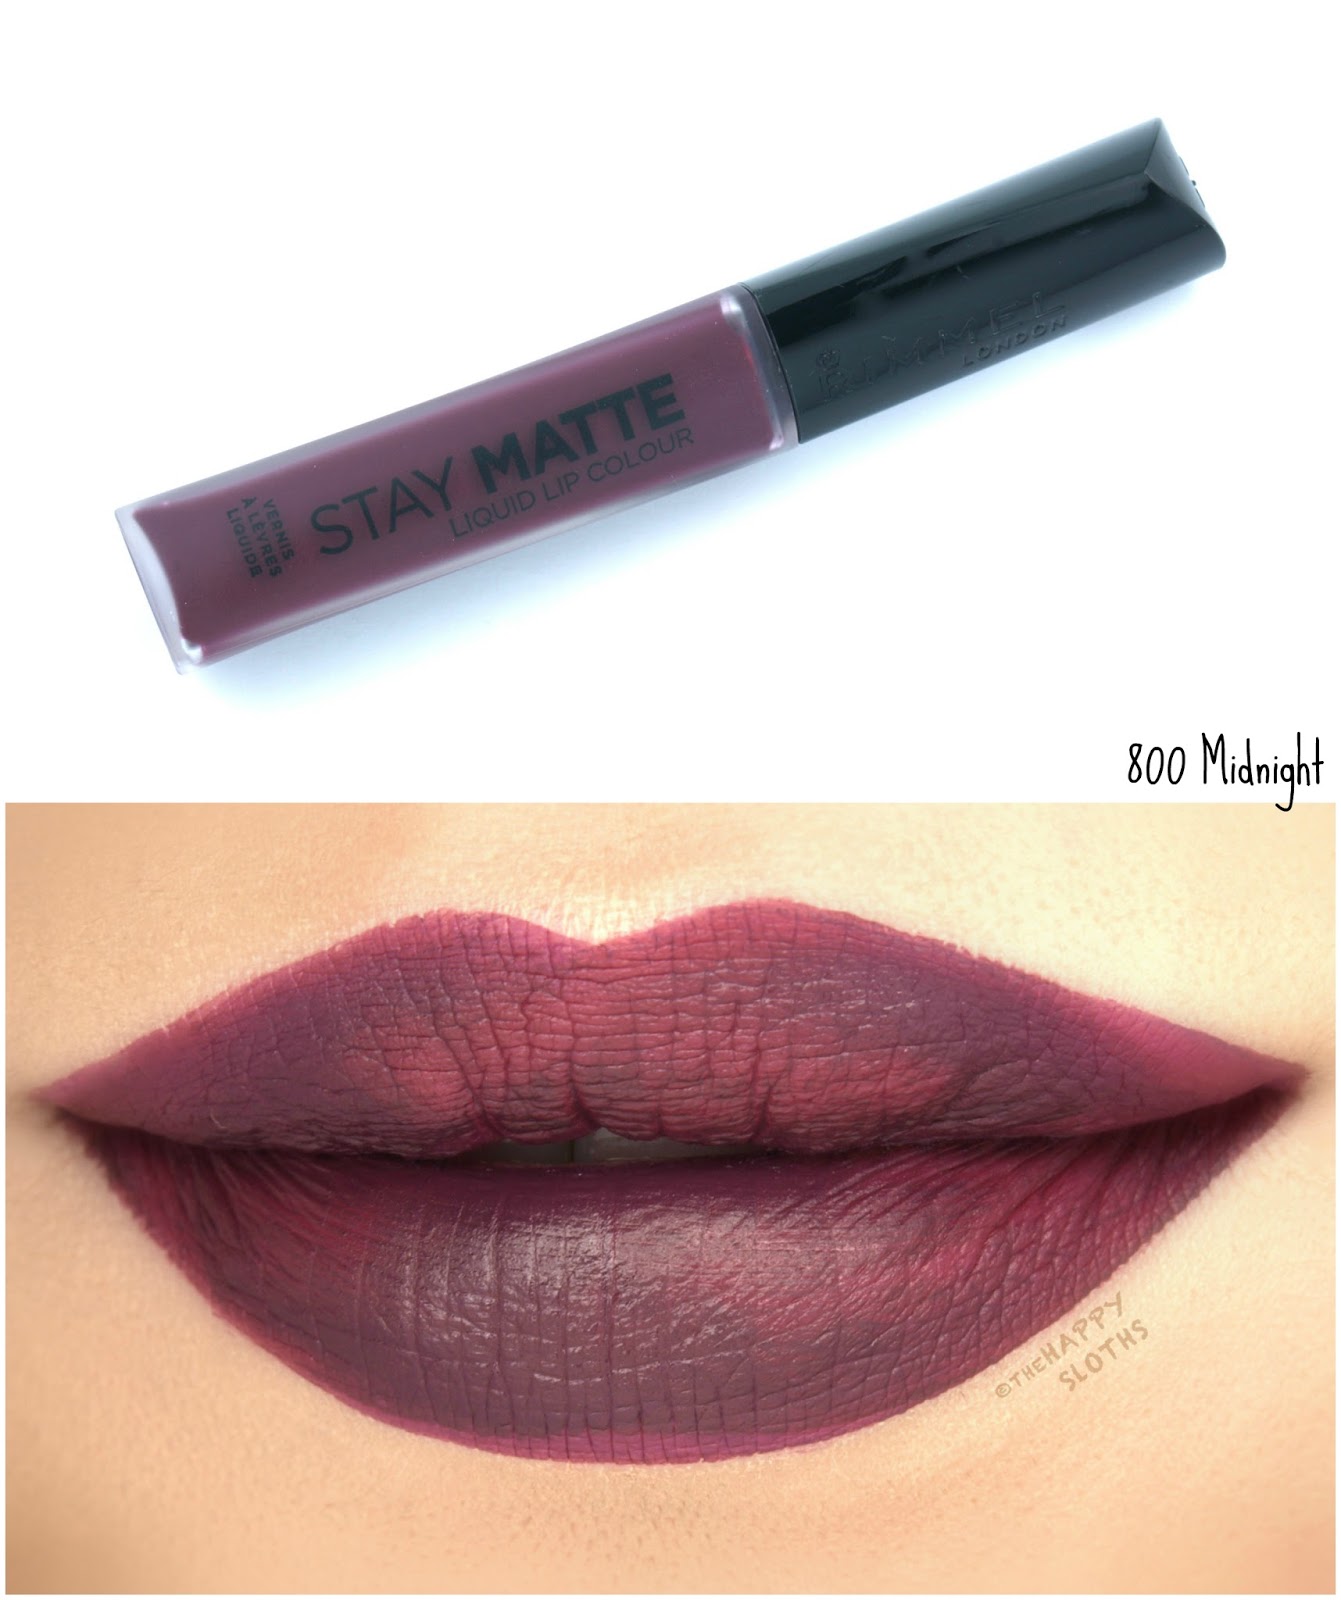 Rimmel London Stay Matte Liquid Lip Colour | 800 Midnight: Review and Swatches